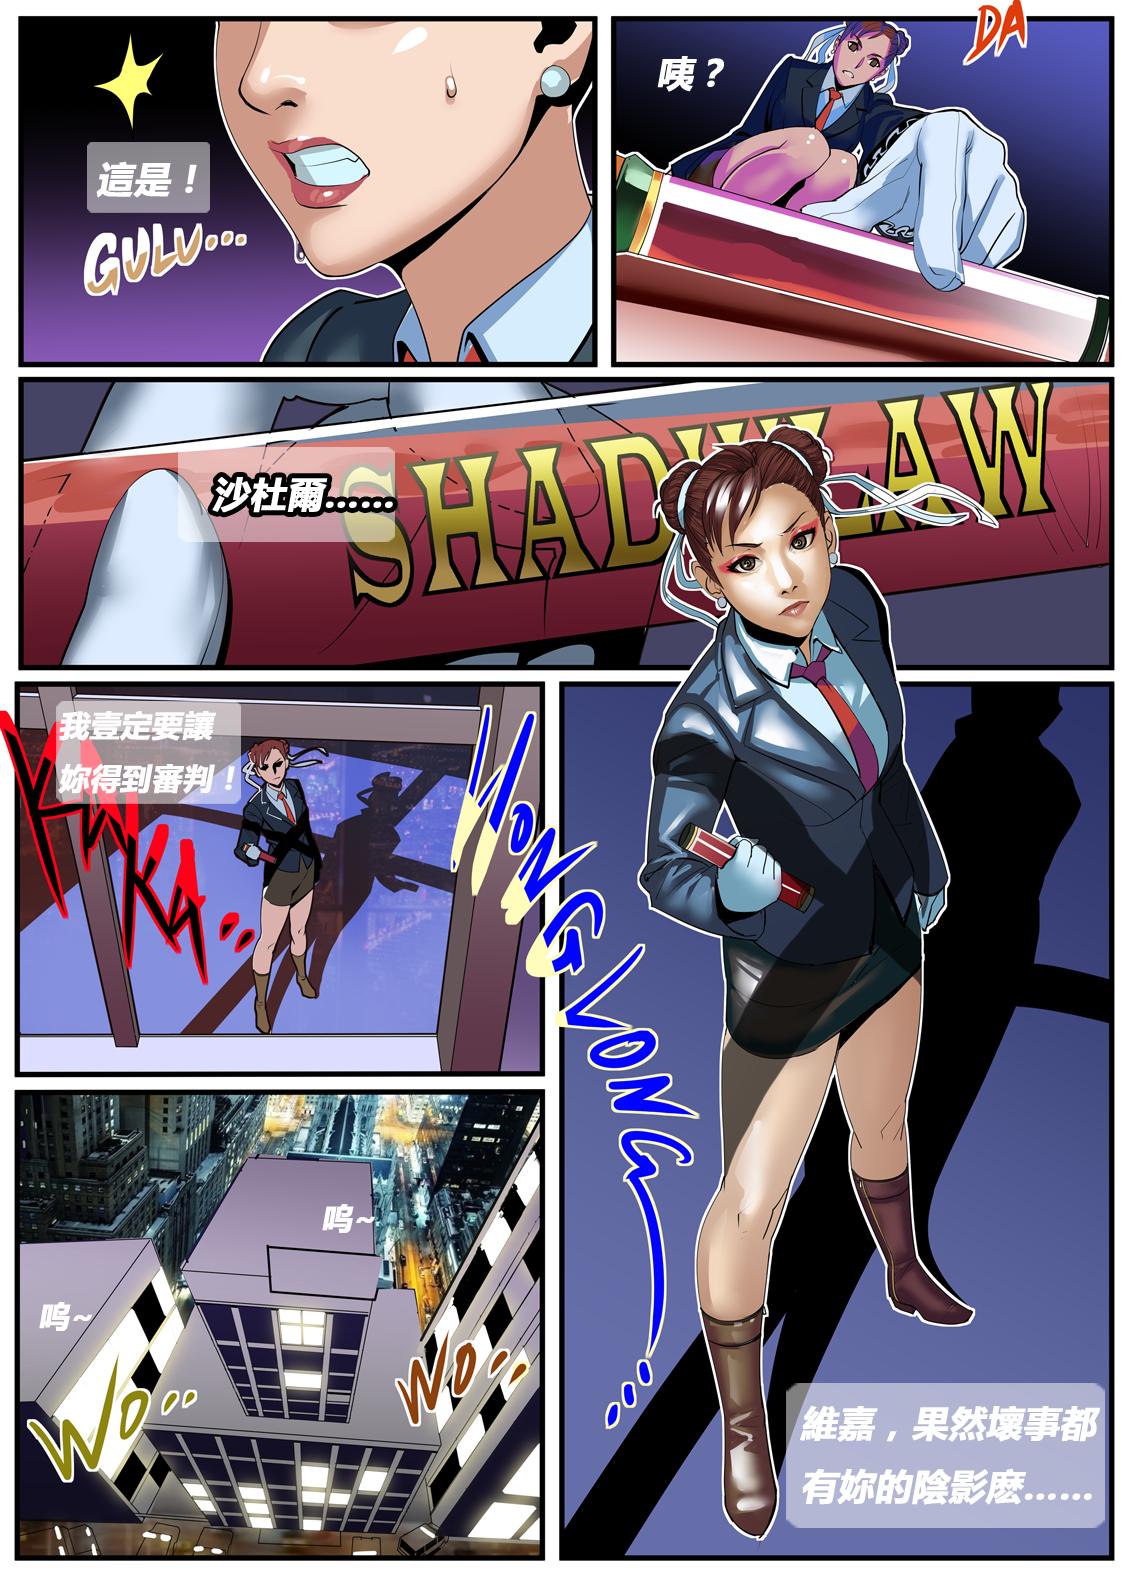 Blows The Lust of Mai Shiranui - King of fighters Uncensored - Page 61